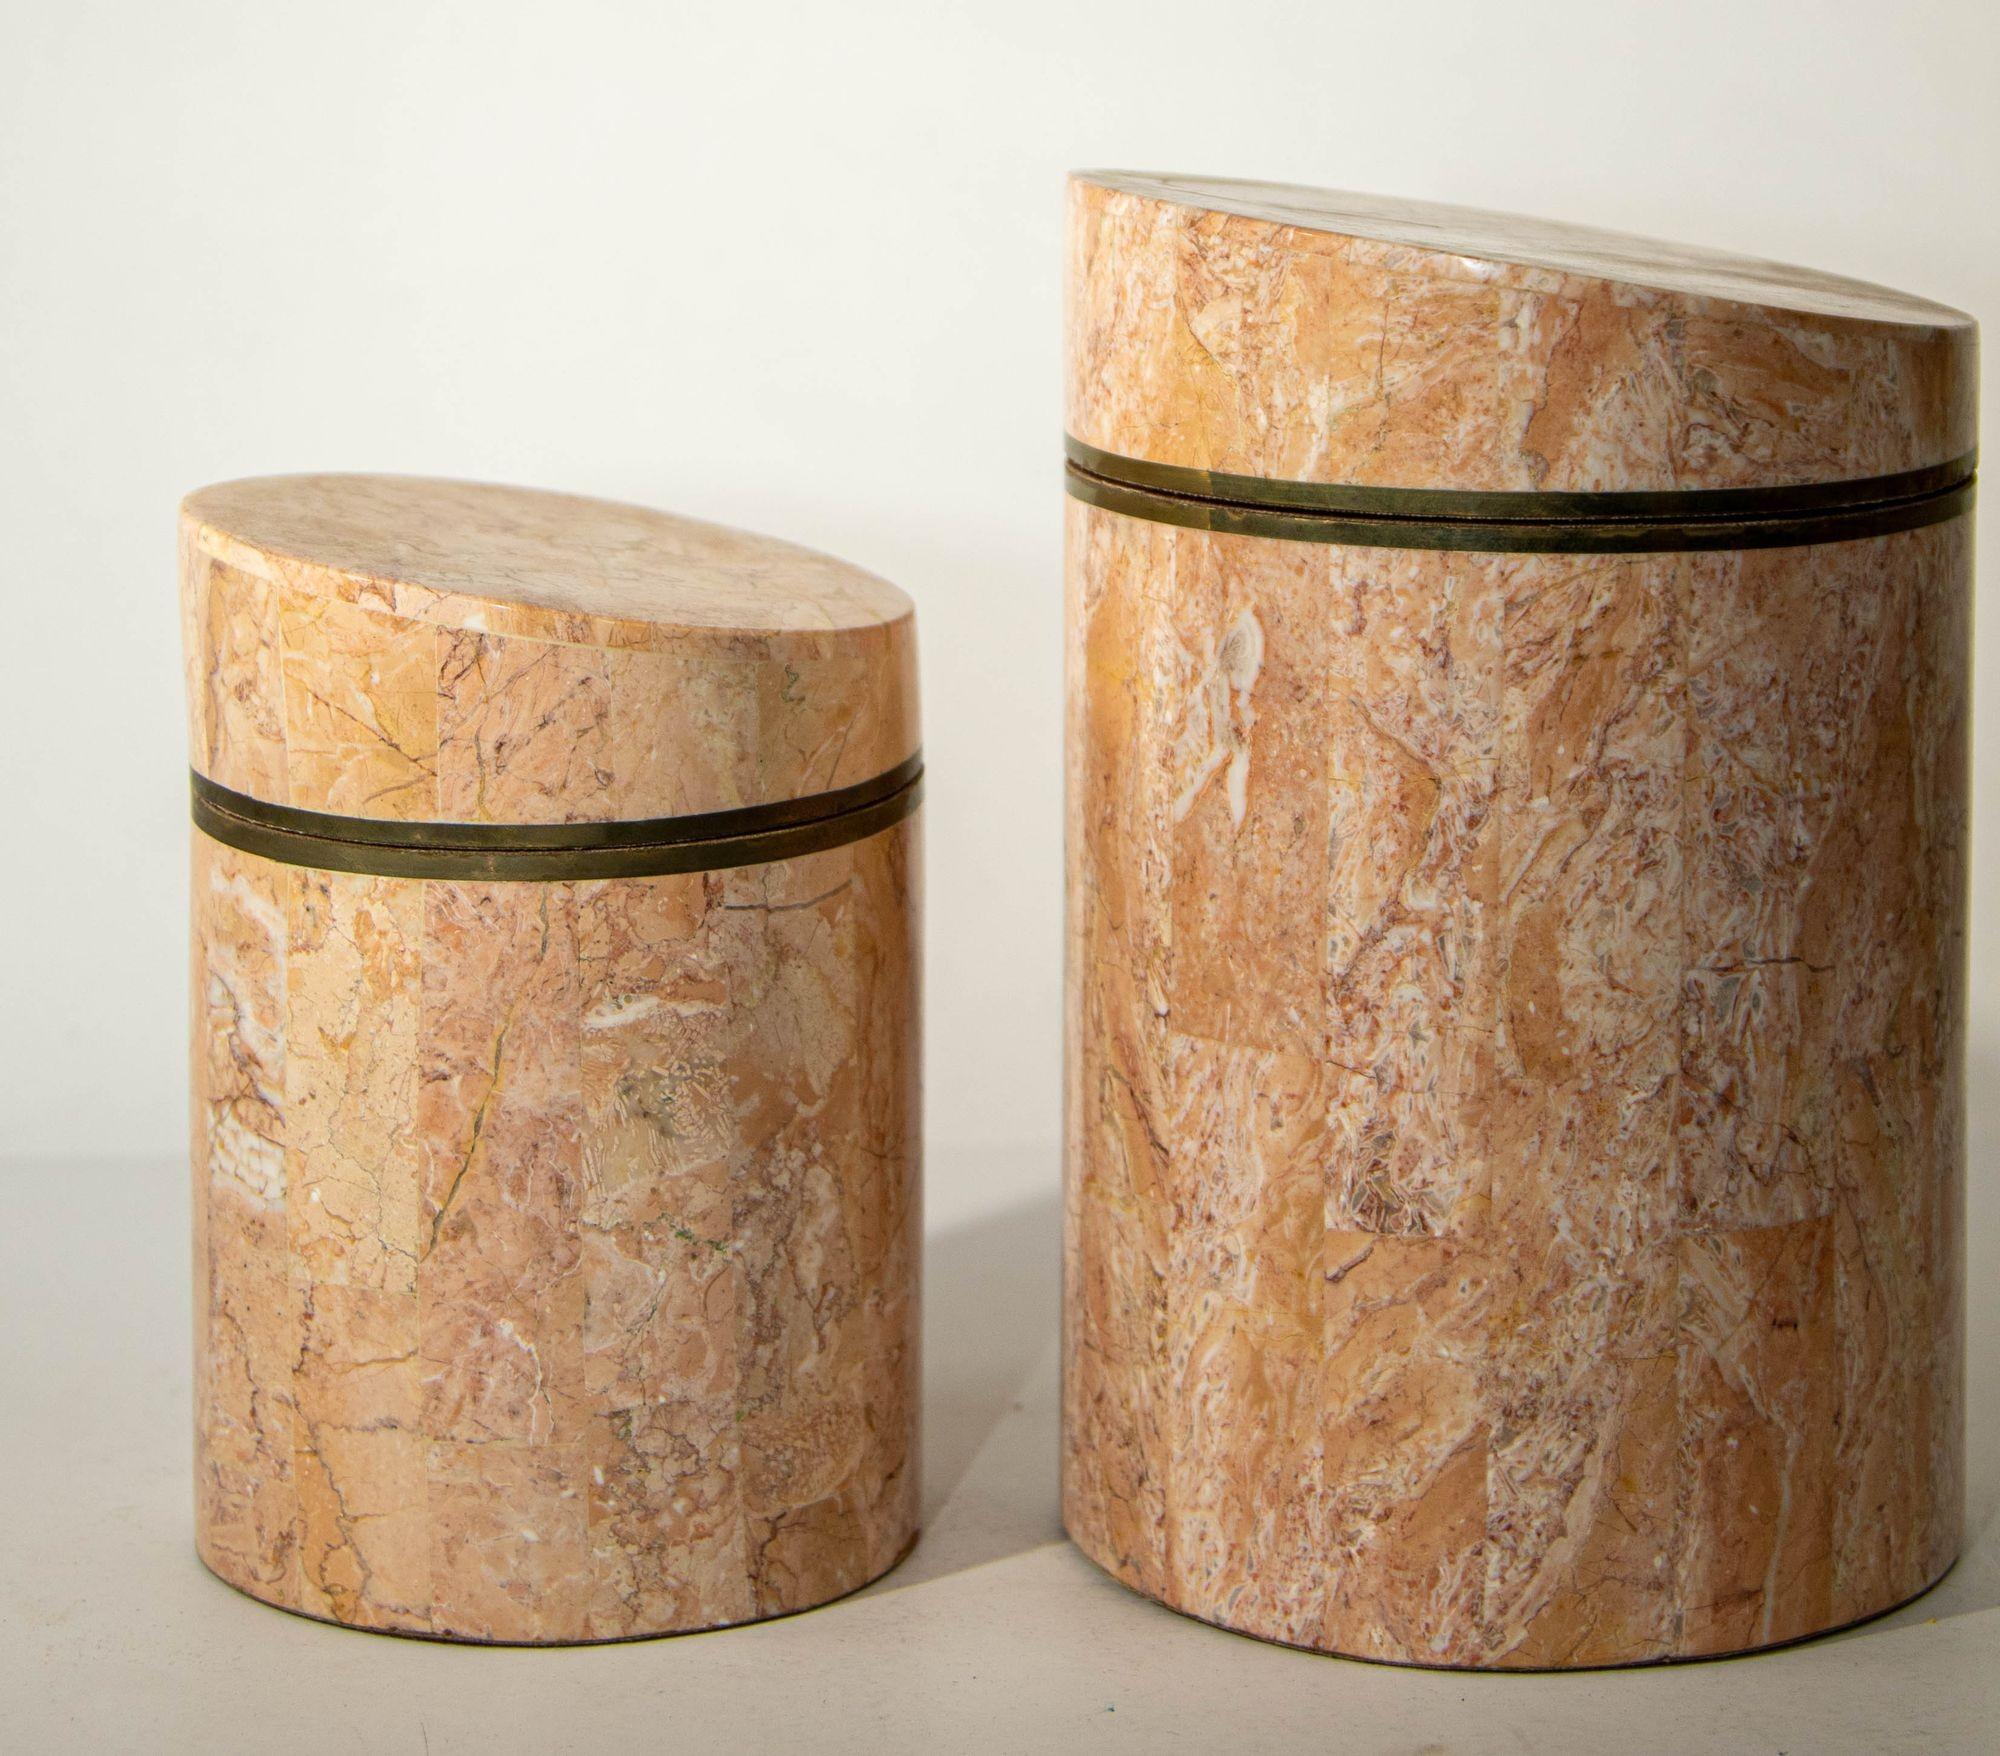 Vintage Tessellated round shape decorative lidded marble boxes by Maitland Smith Set of Two.
Dimensions : Plus court : 4